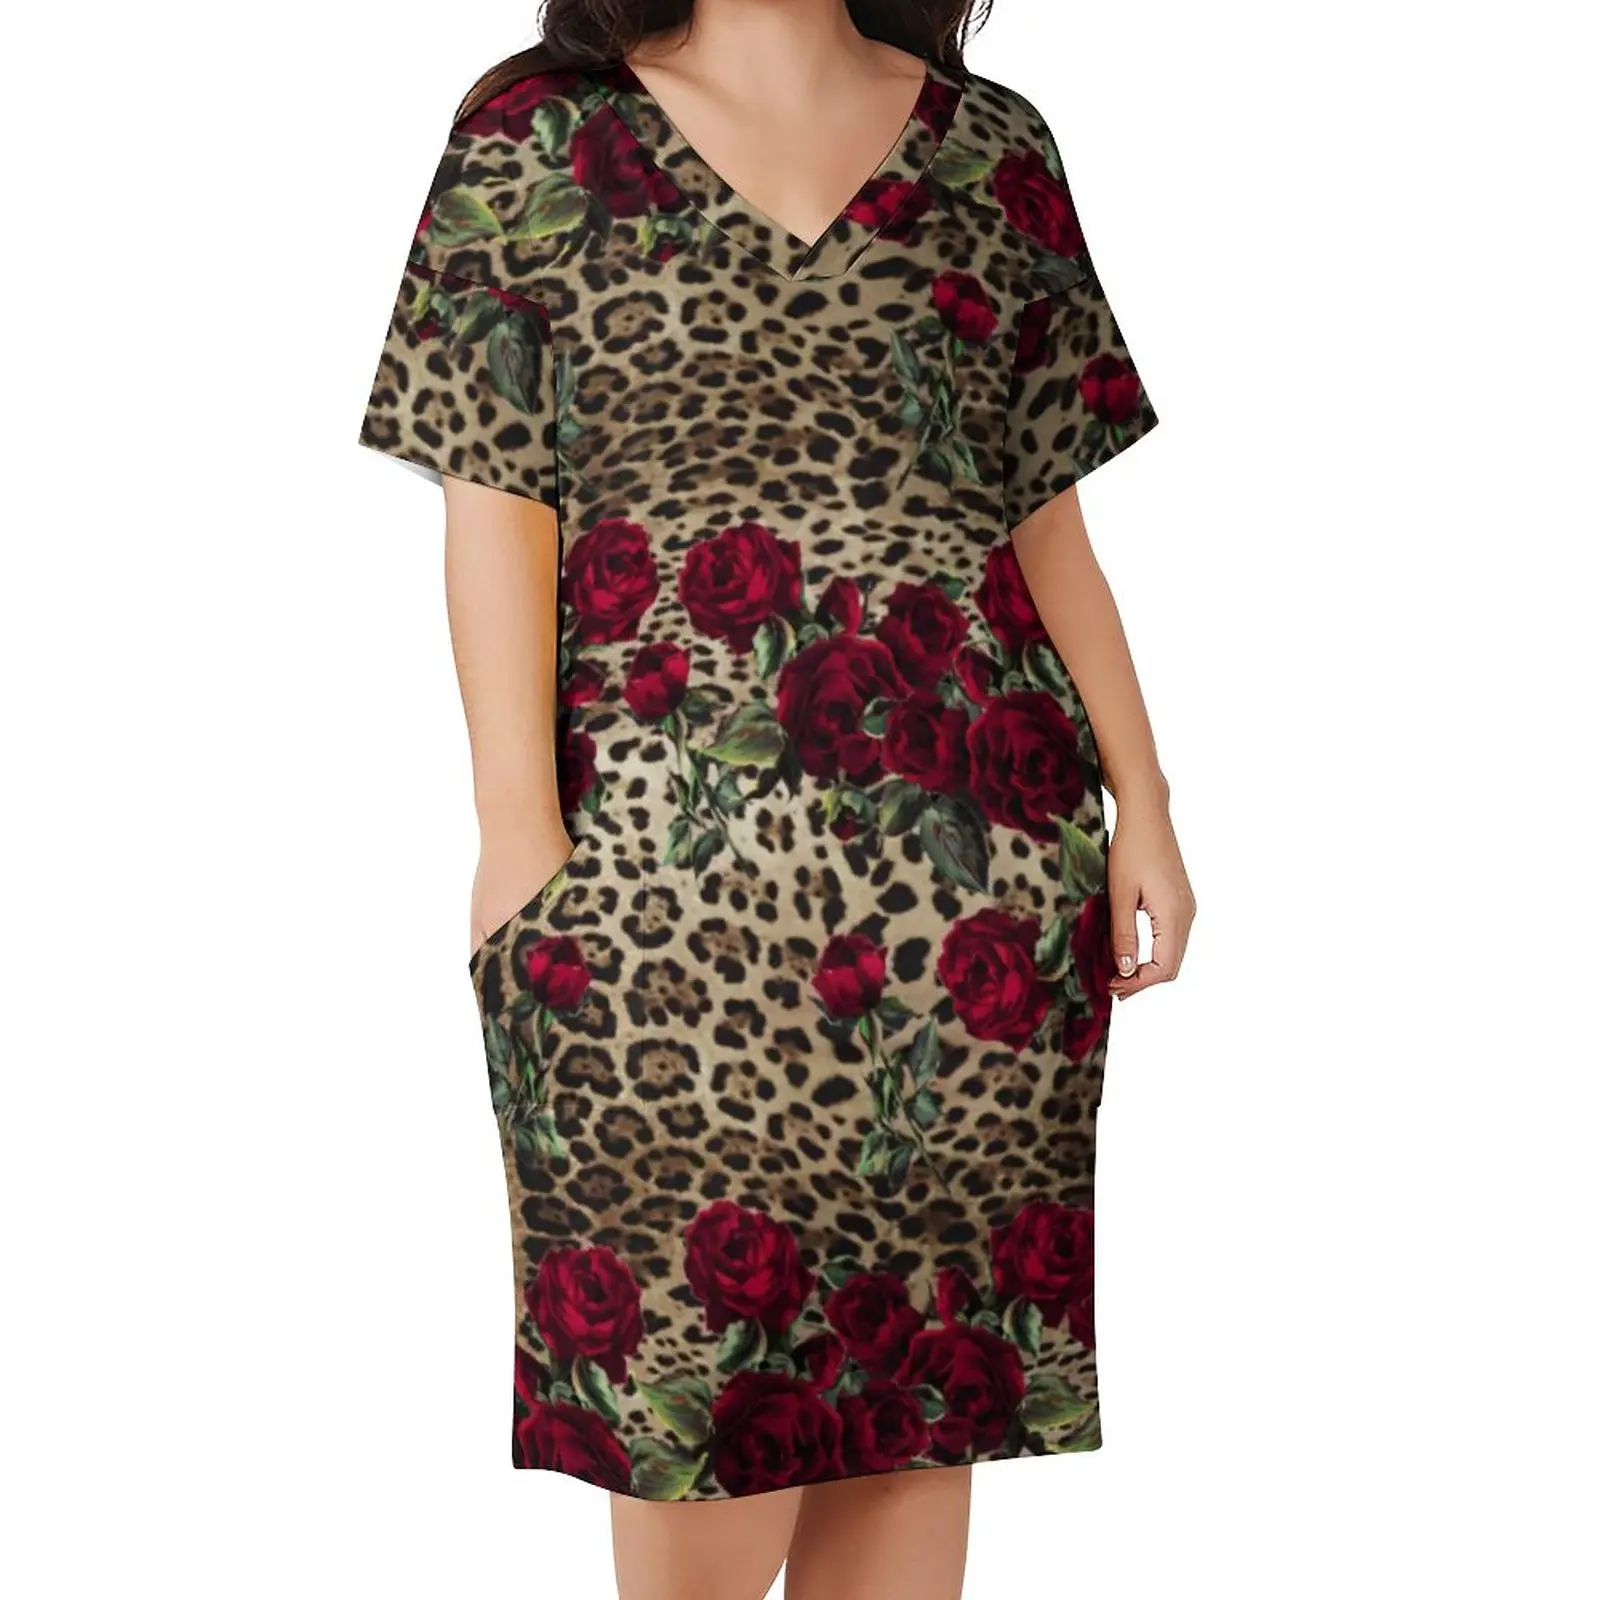 Gold Leopard Casual Dress Woman Red Roses Print Sexy Dresses Summer V Neck Streetwear Graphic Dress Plus Size 4XL 5XL